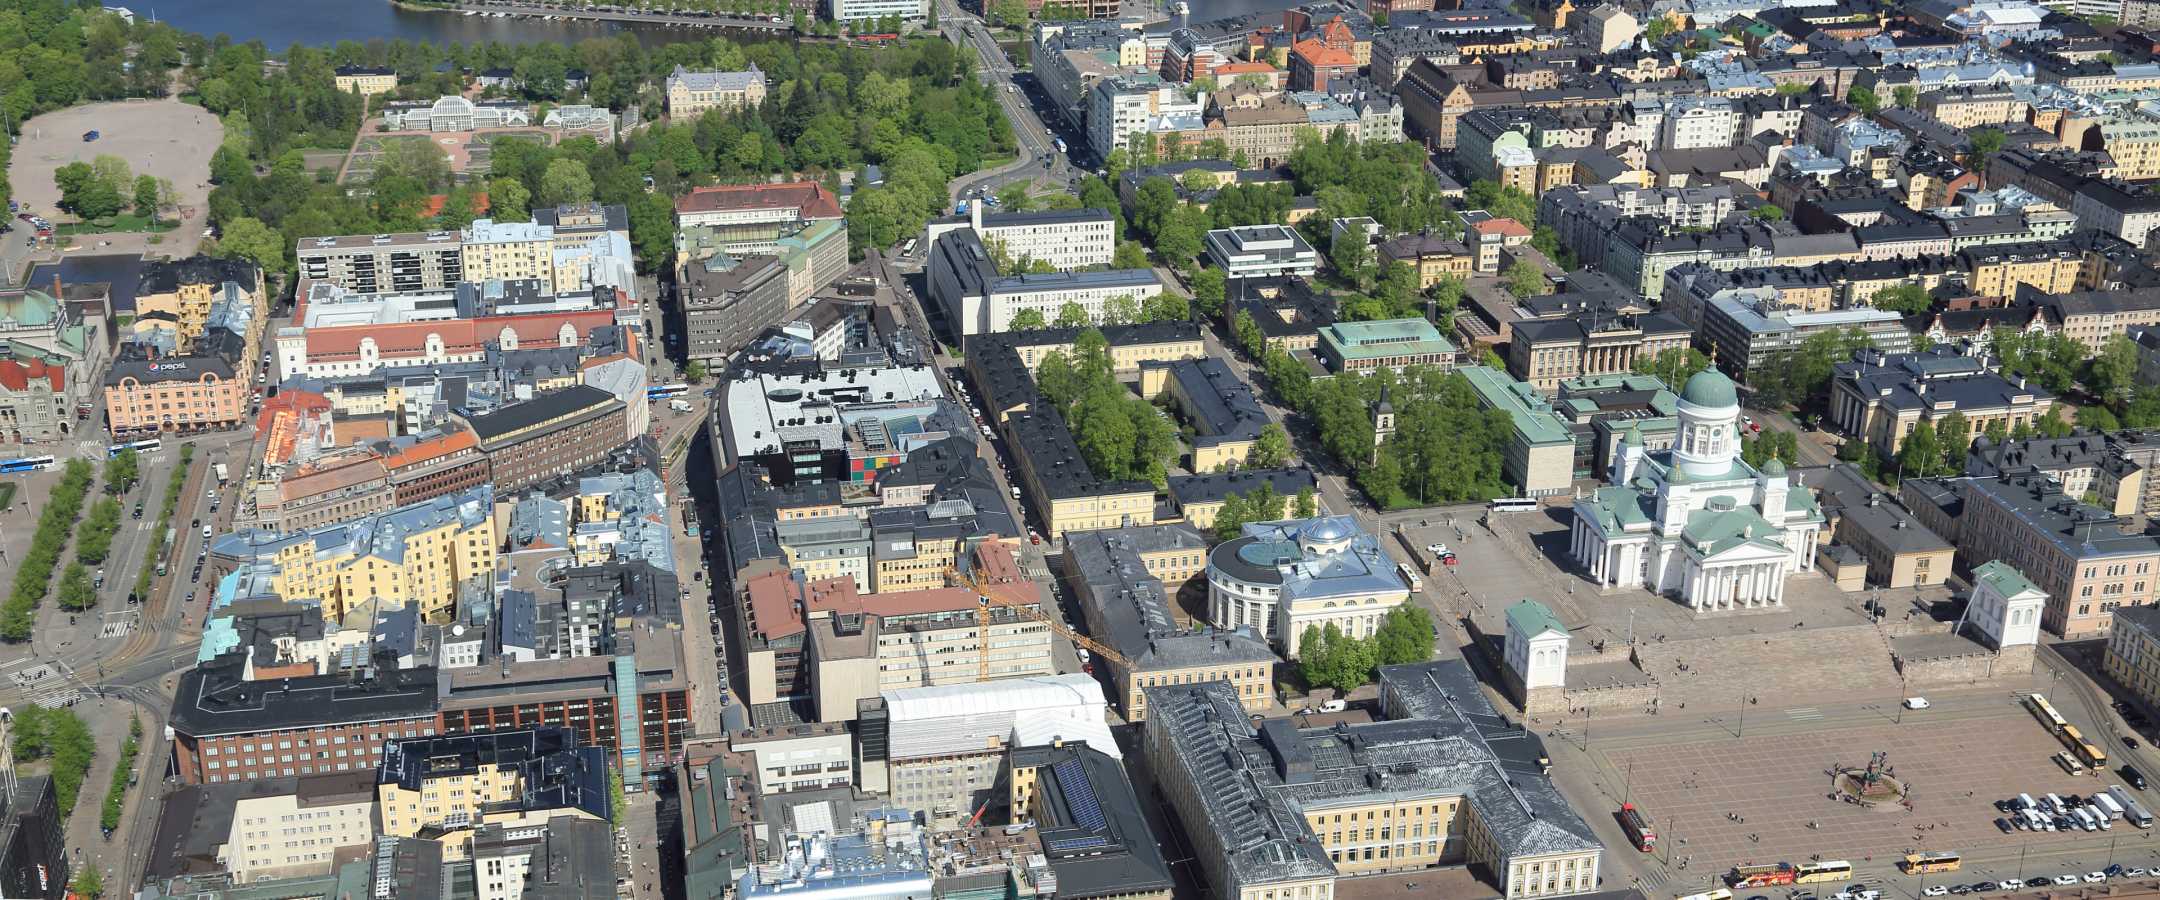 City Centre Campus in Helsinki